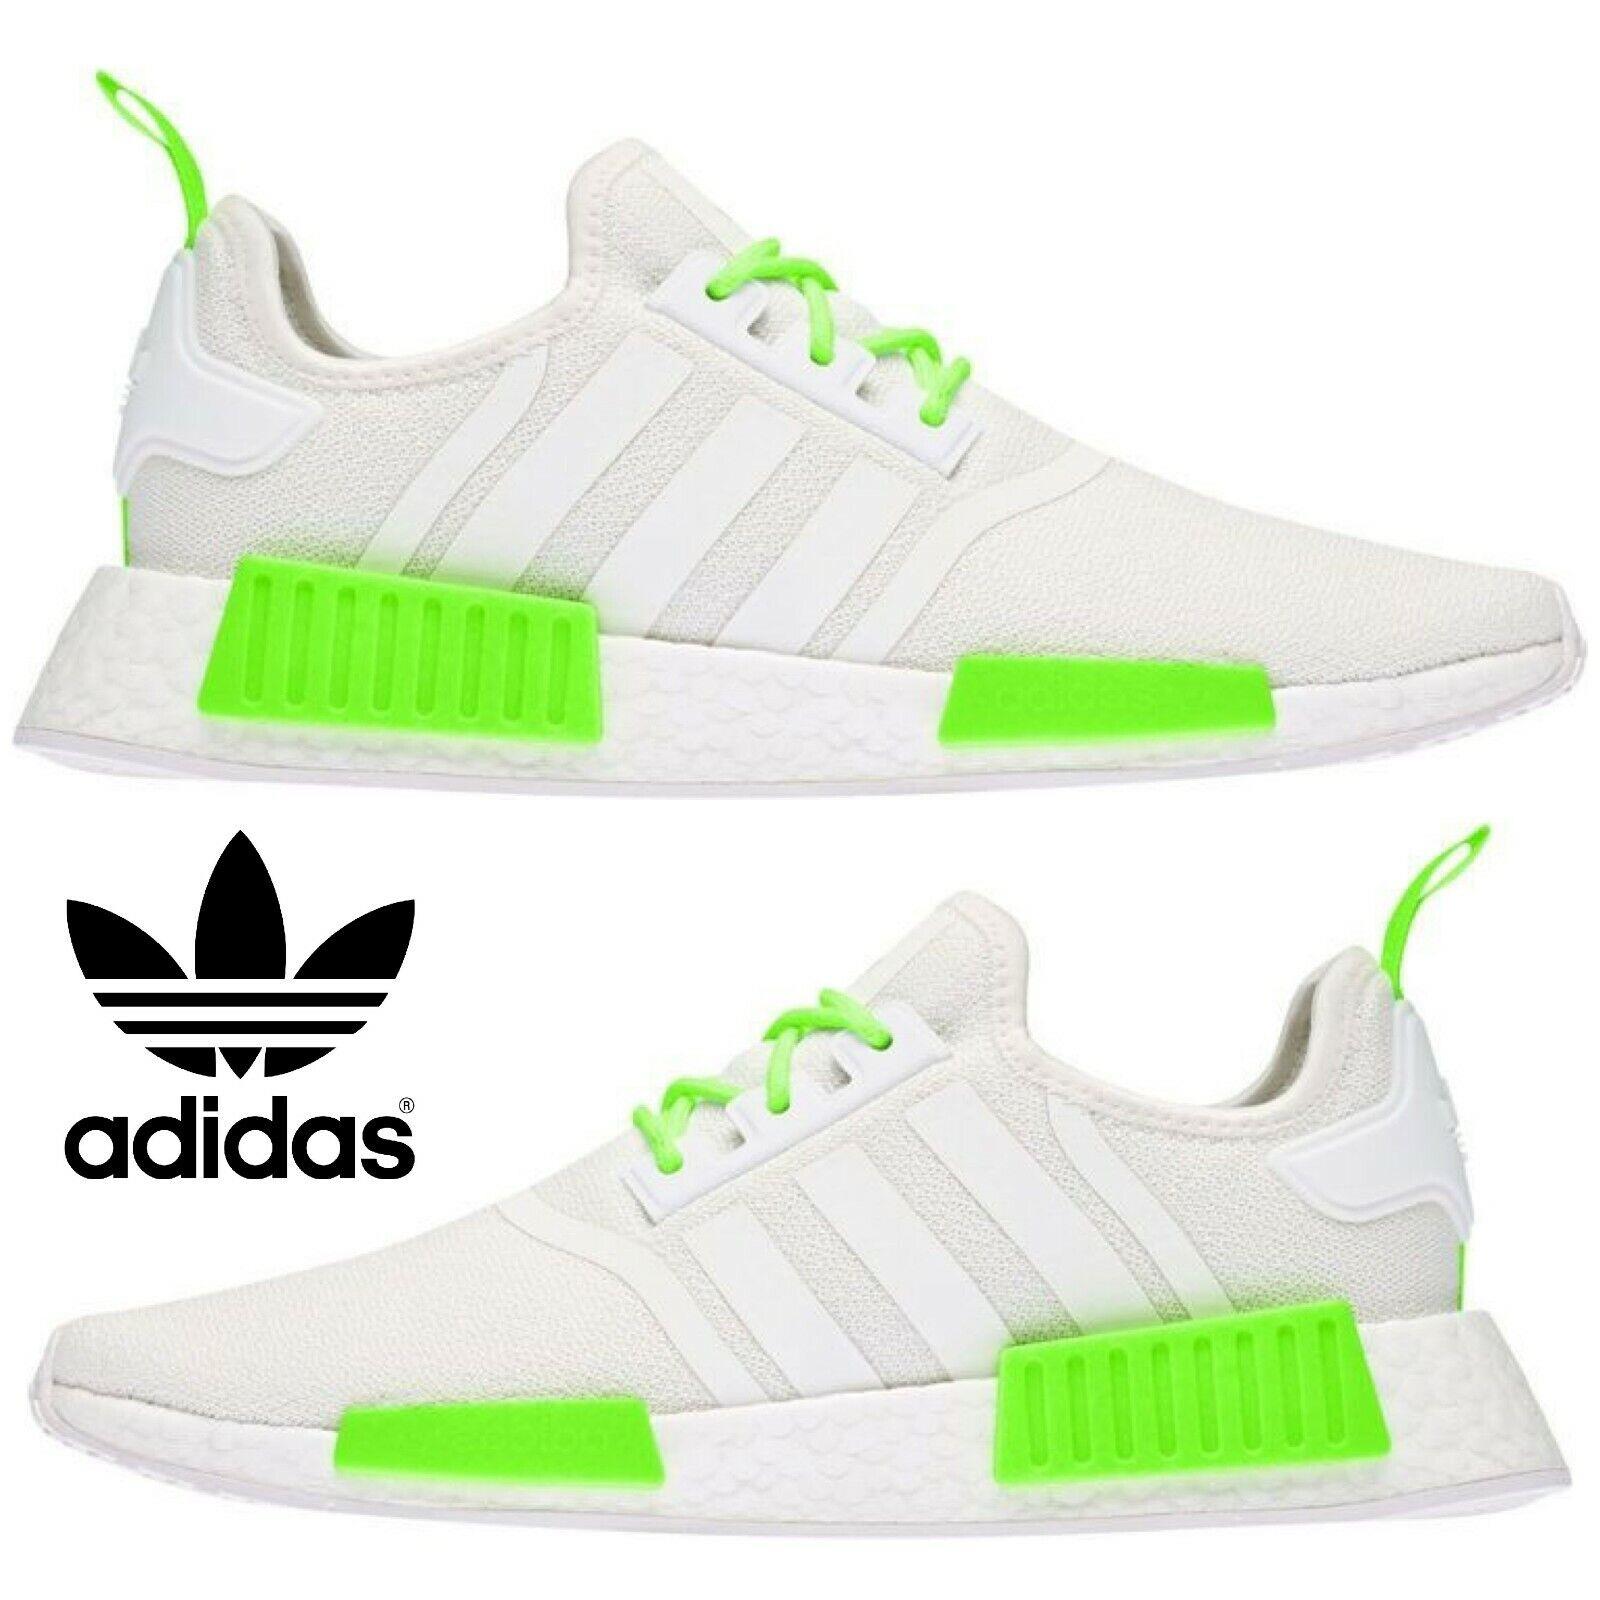 Adidas Originals Nmd R1 Men`s Sneakers Running Shoes Gym Casual Sport Gray Neon